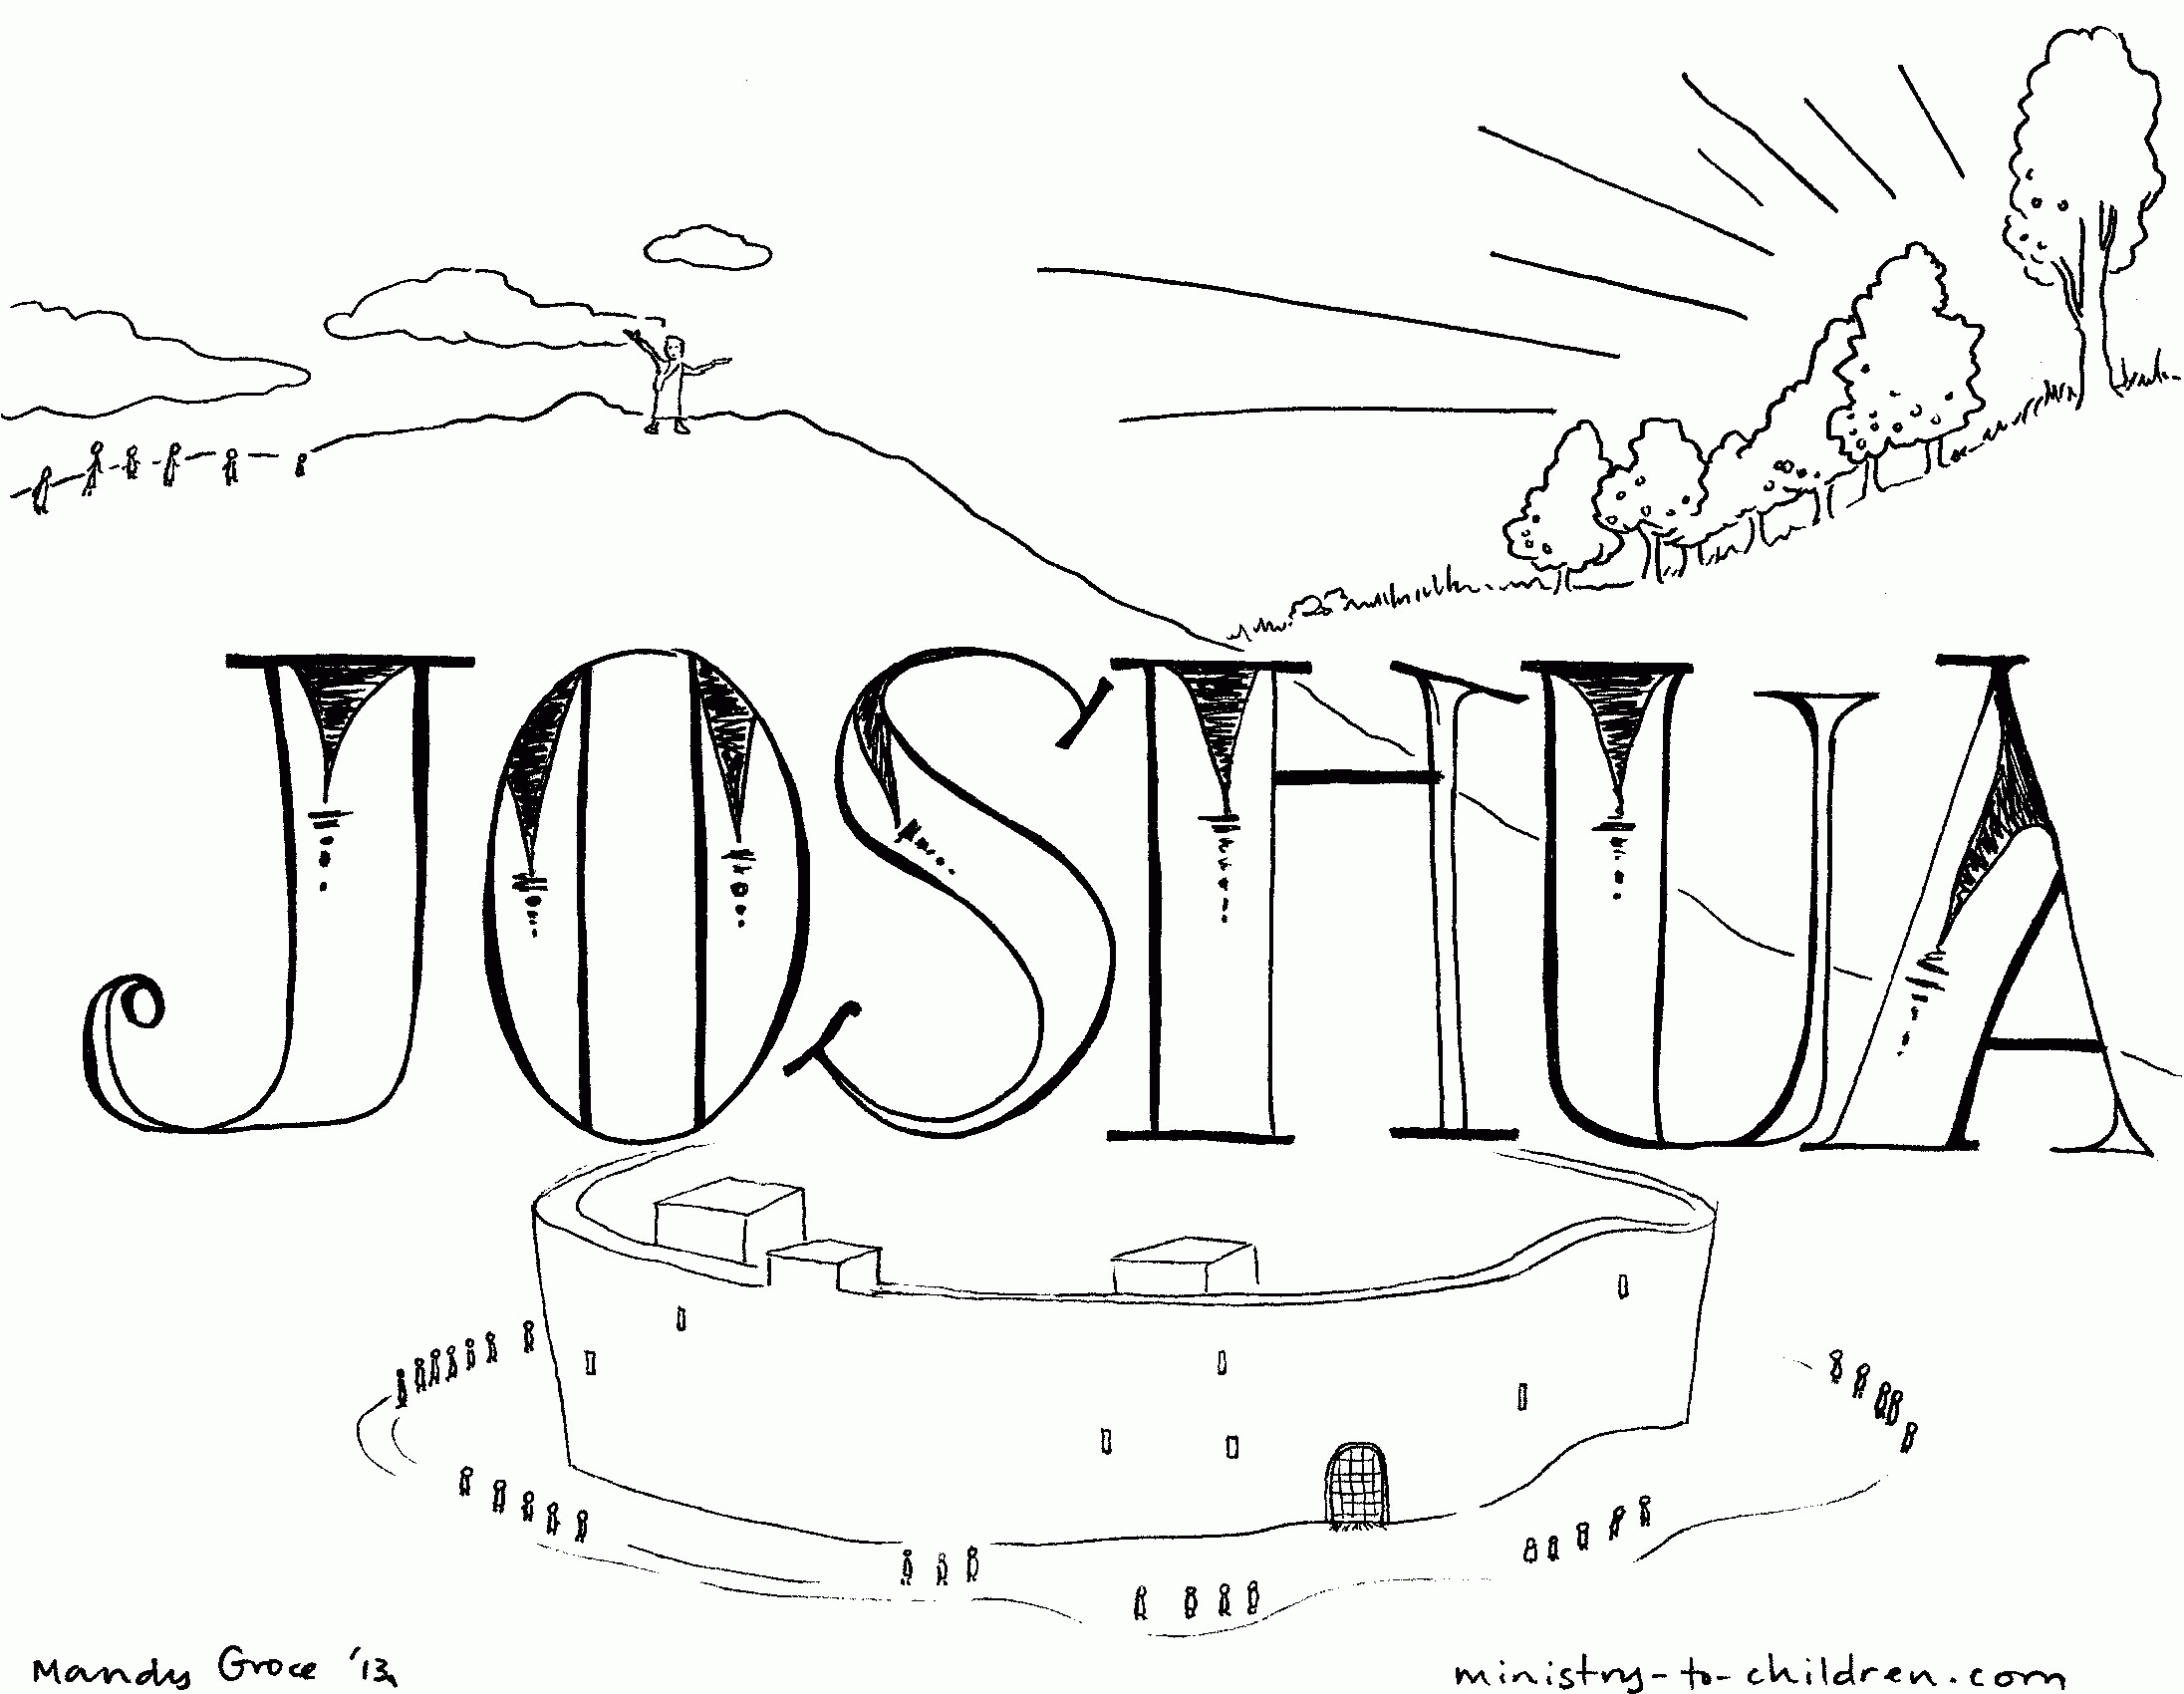 11 Pics Of Joshua Story Coloring Pages - Walls Of Jericho Bible